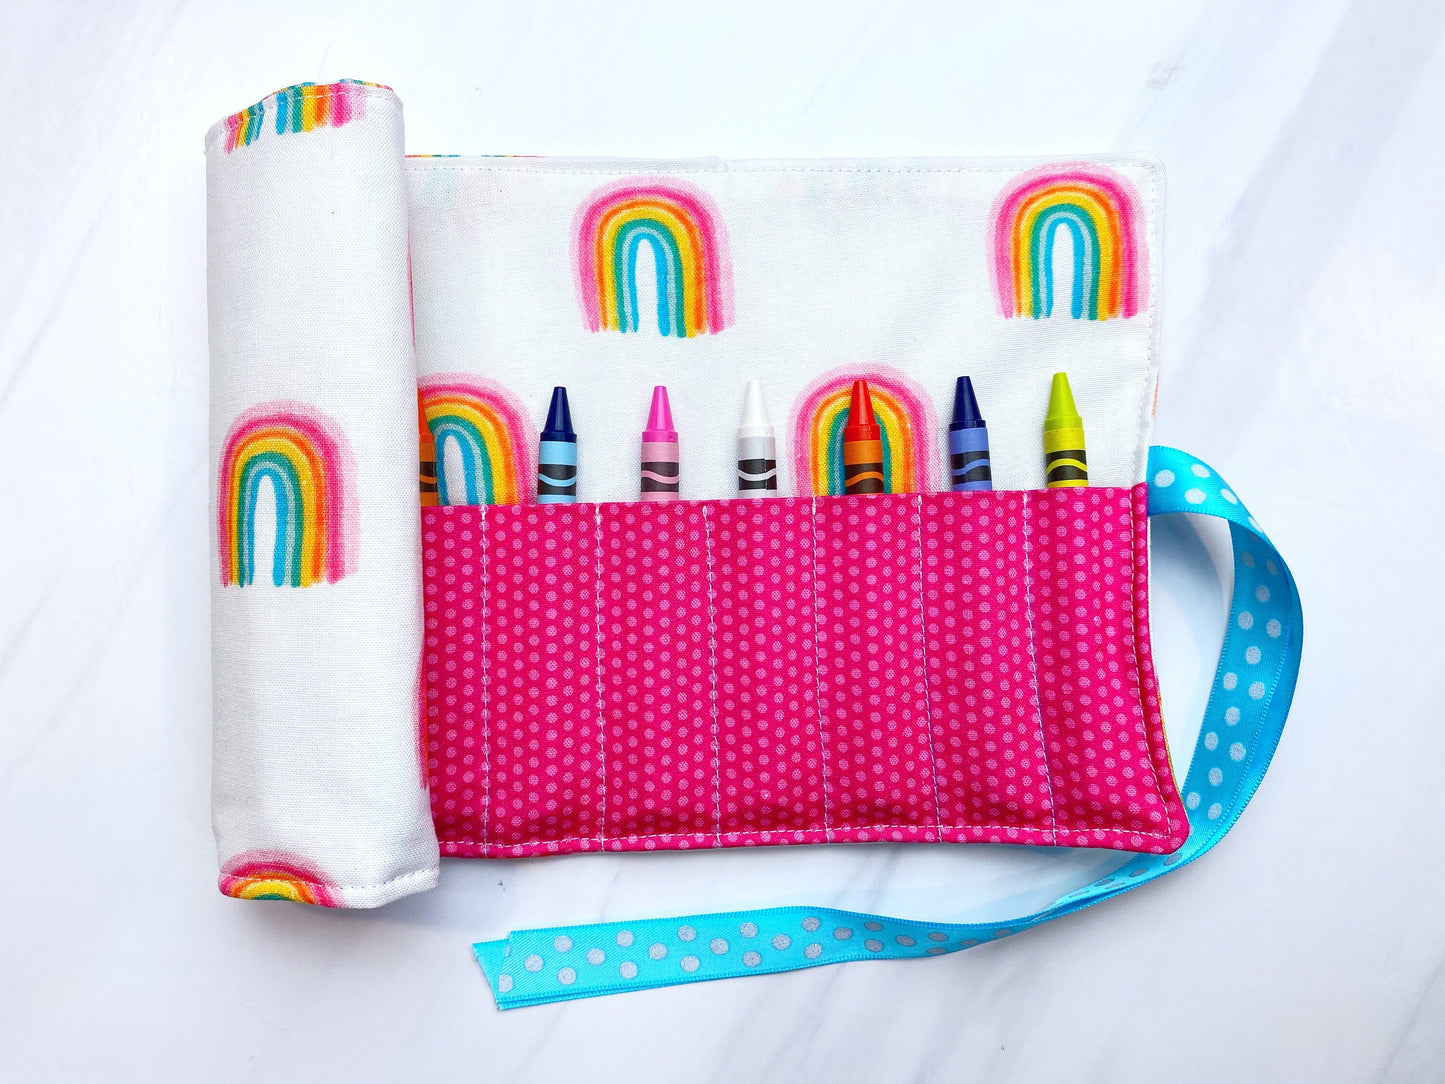 Crayon and Marker Roll Up Holder